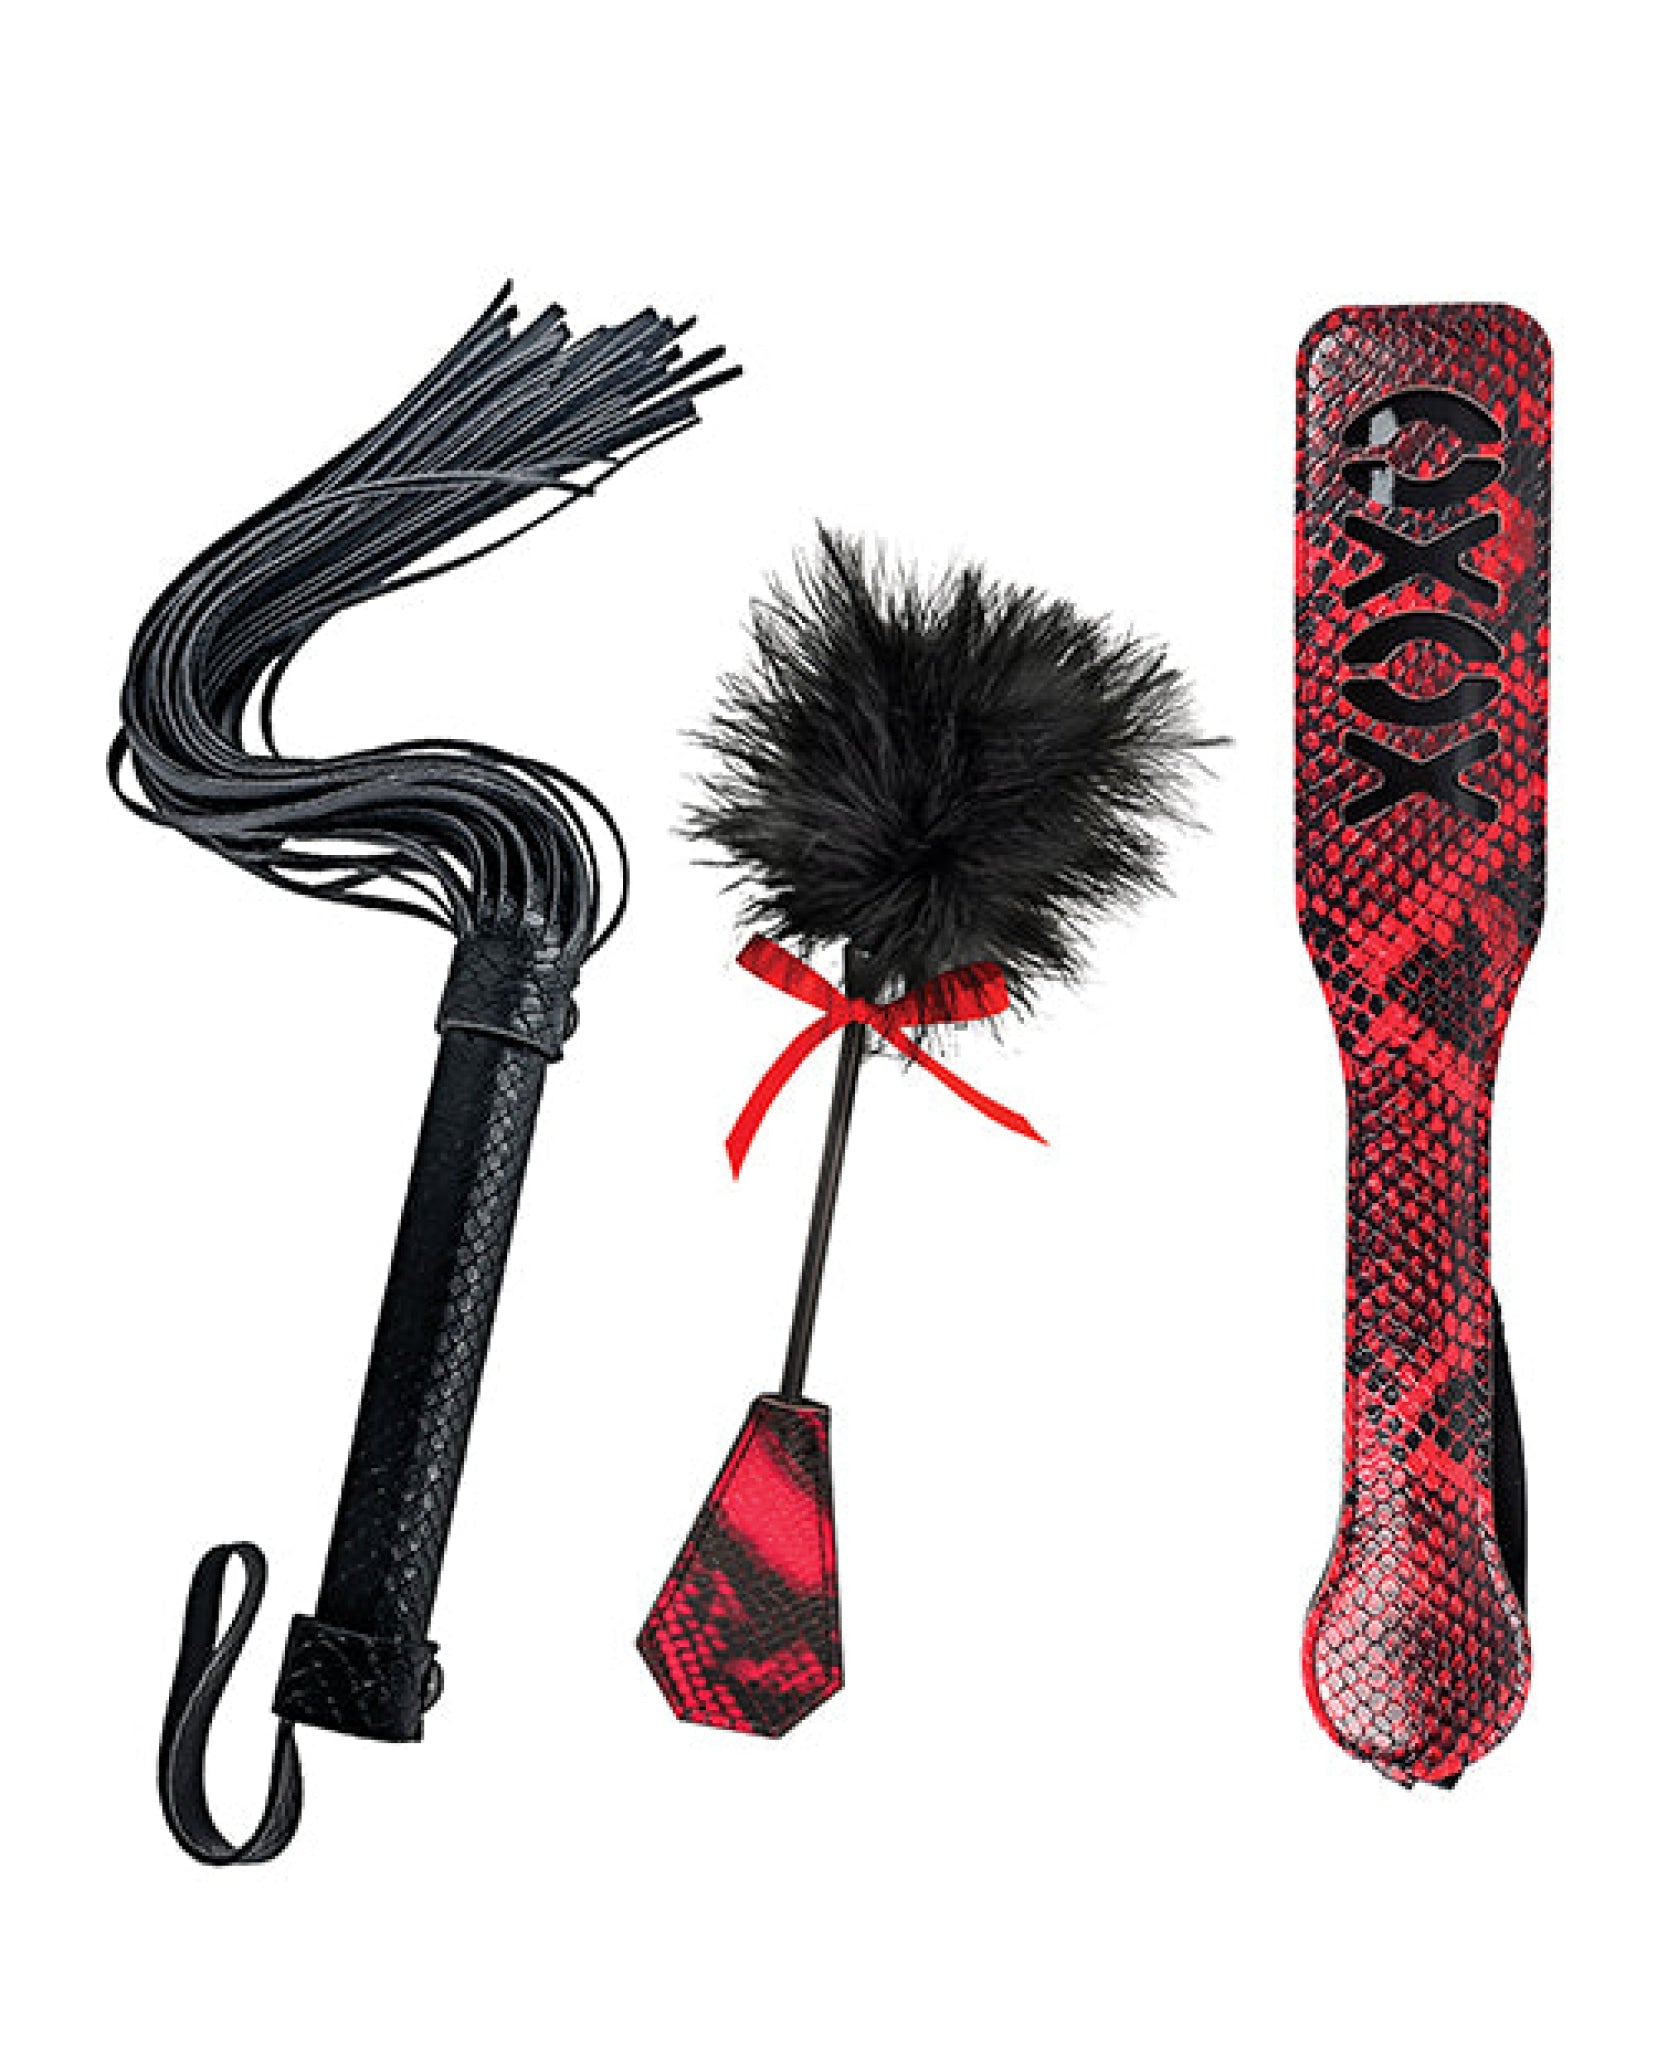 Lovers Kits Whip, Tickle & Paddle Nasstoys